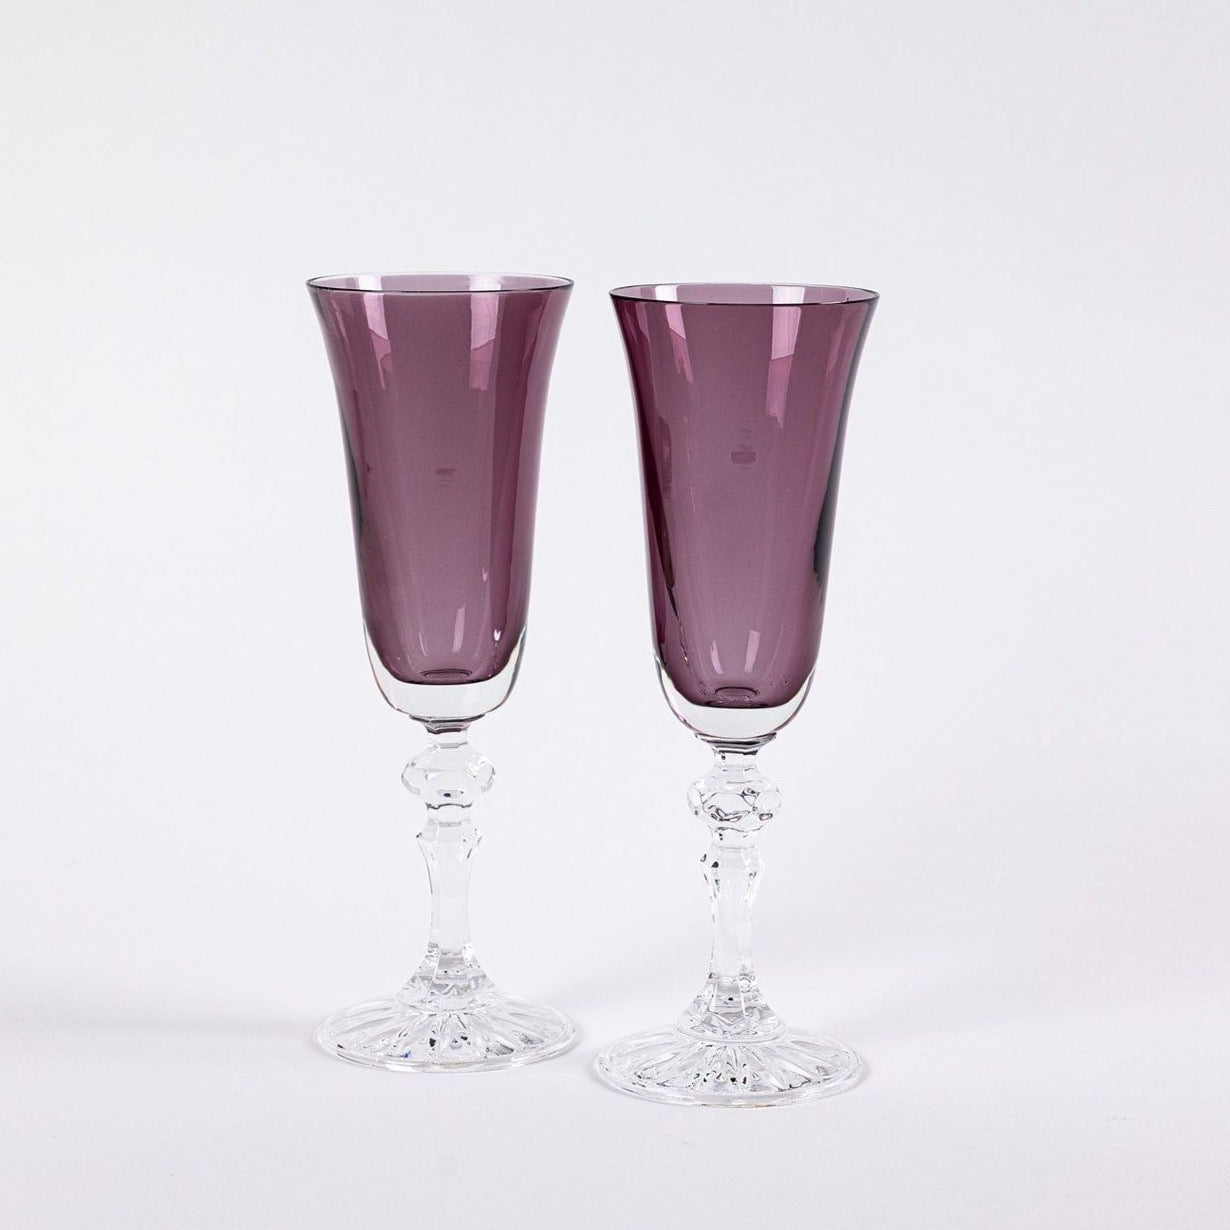 Painted Crystal Champagne Flutes - Set of 2